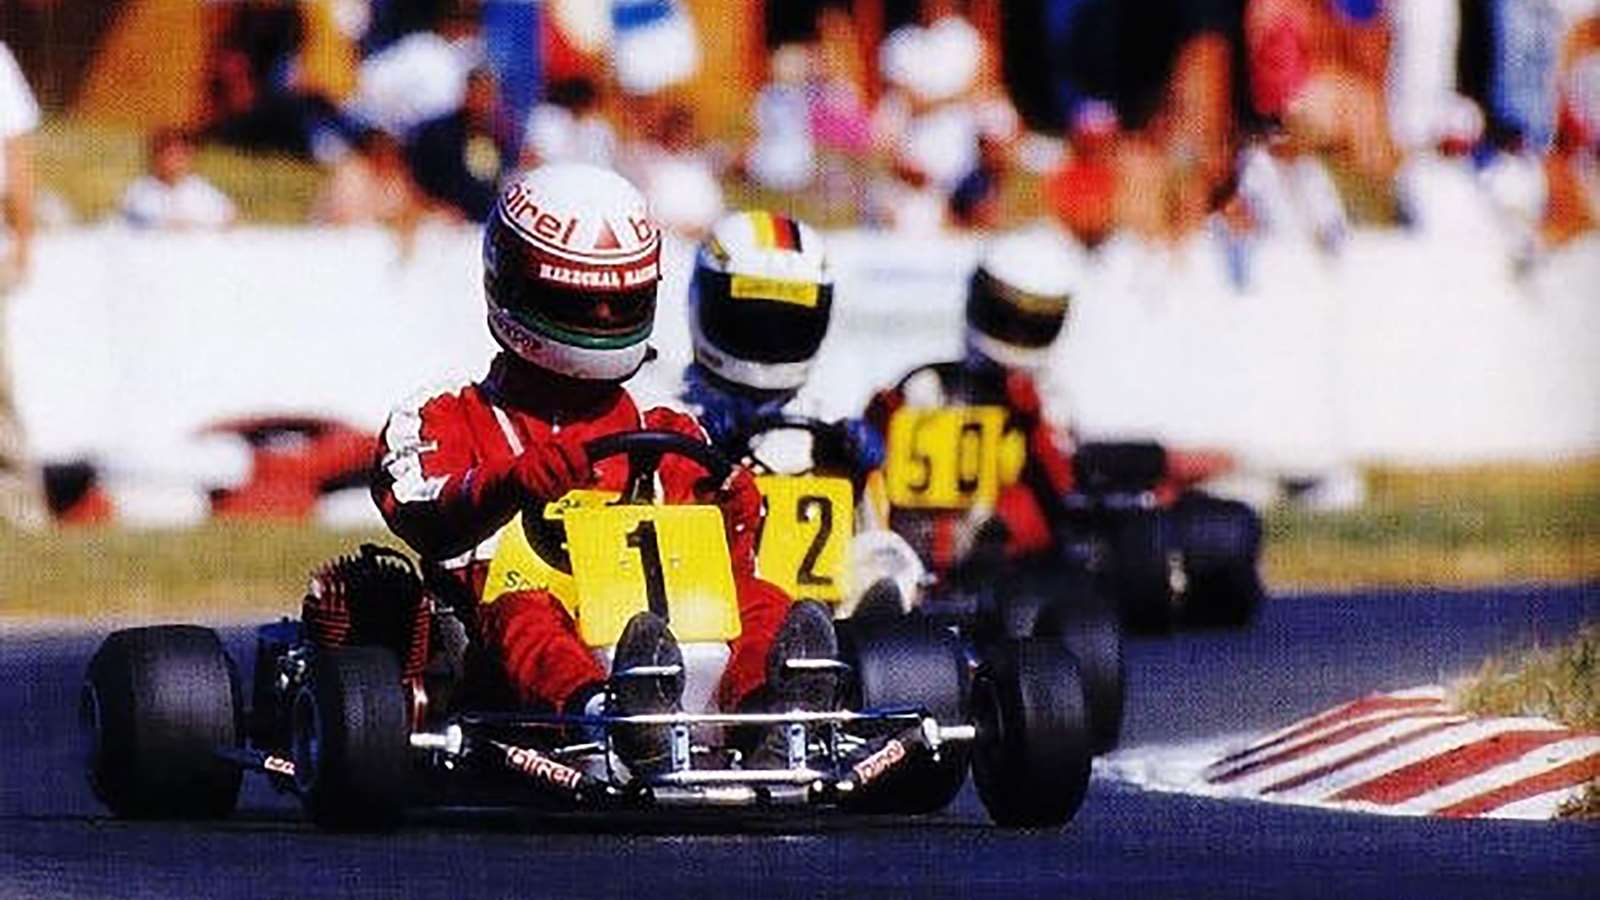 The Path From Kart Racing to F1